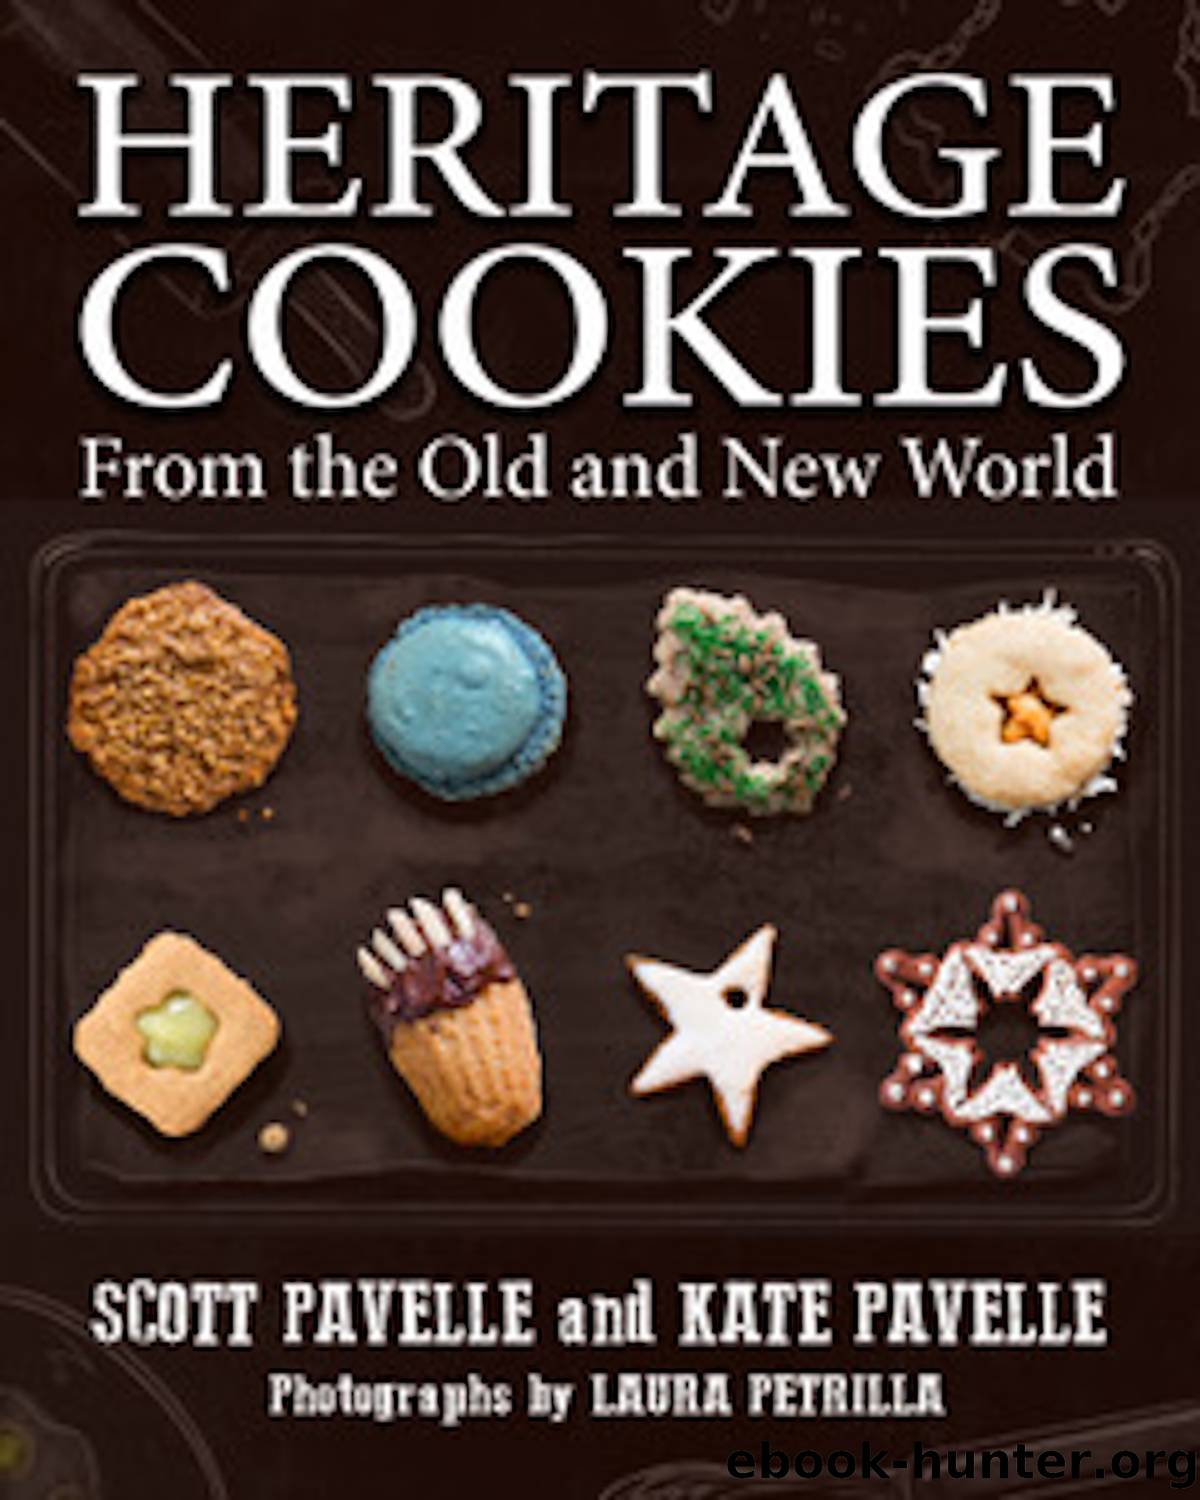 Heritage Cookies of the Old and the New World by Scott Pavelle